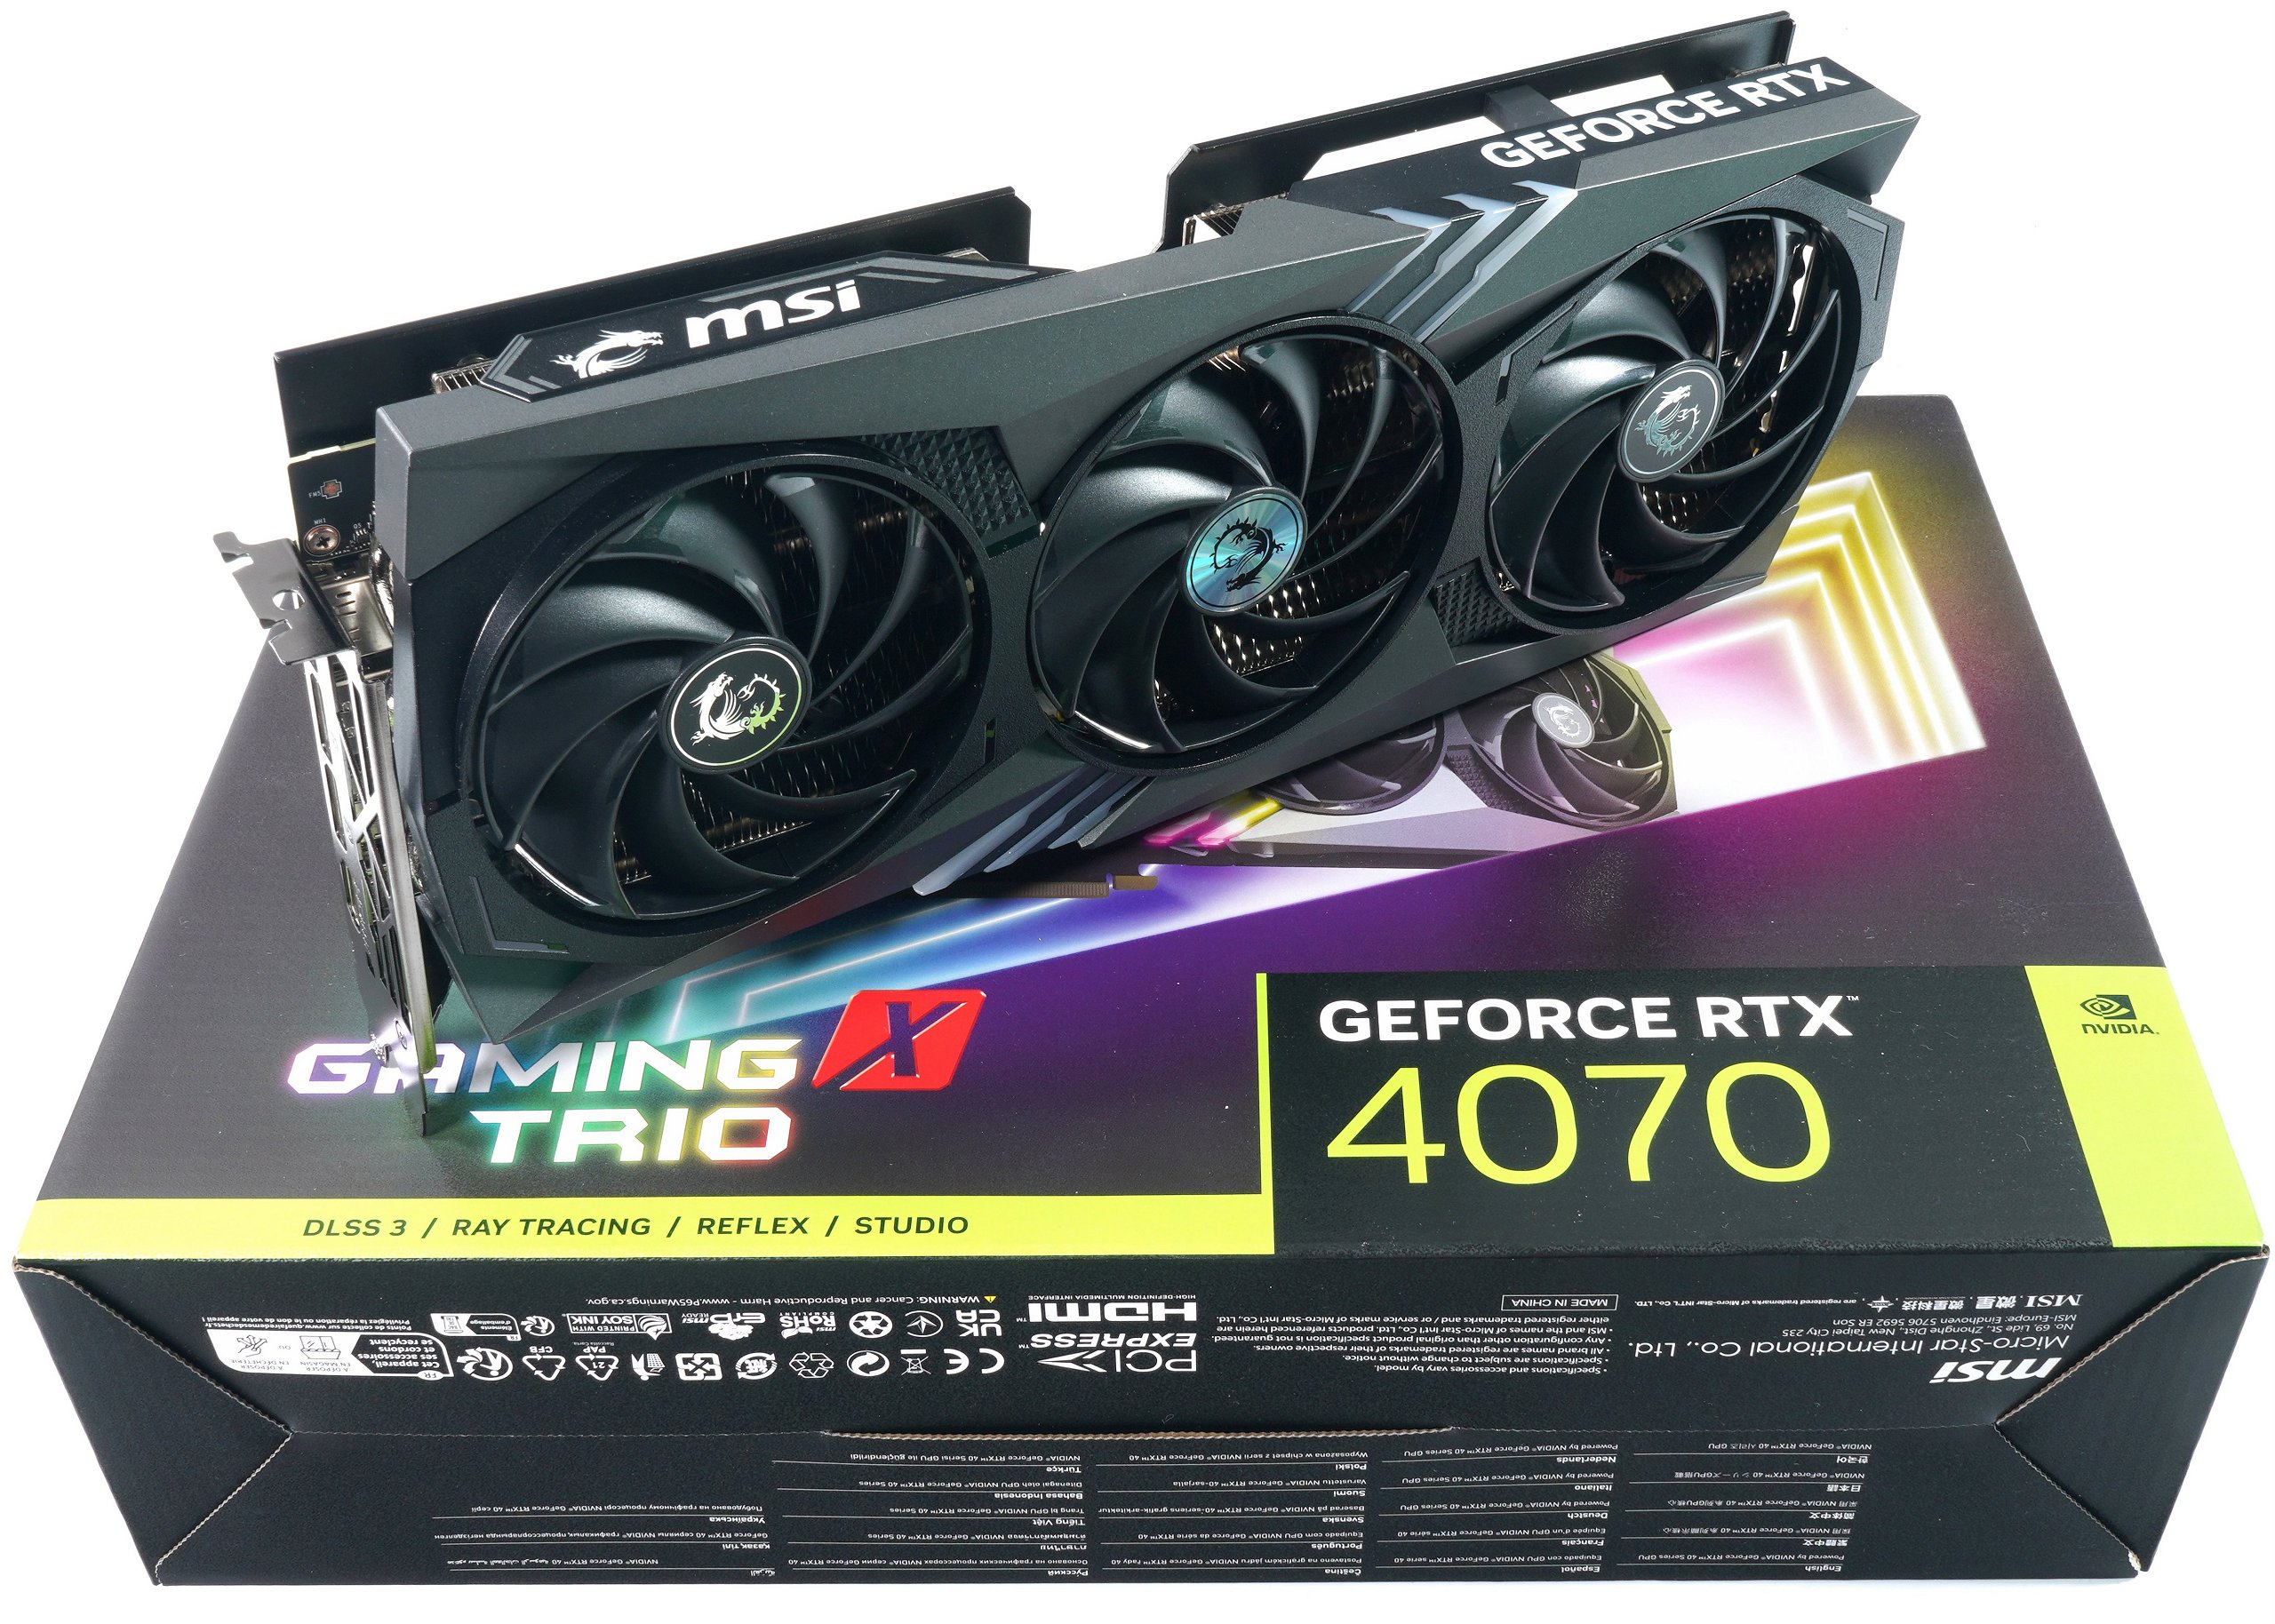 Nvidia GeForce RTX 4070 Ti Reviews, Pros and Cons